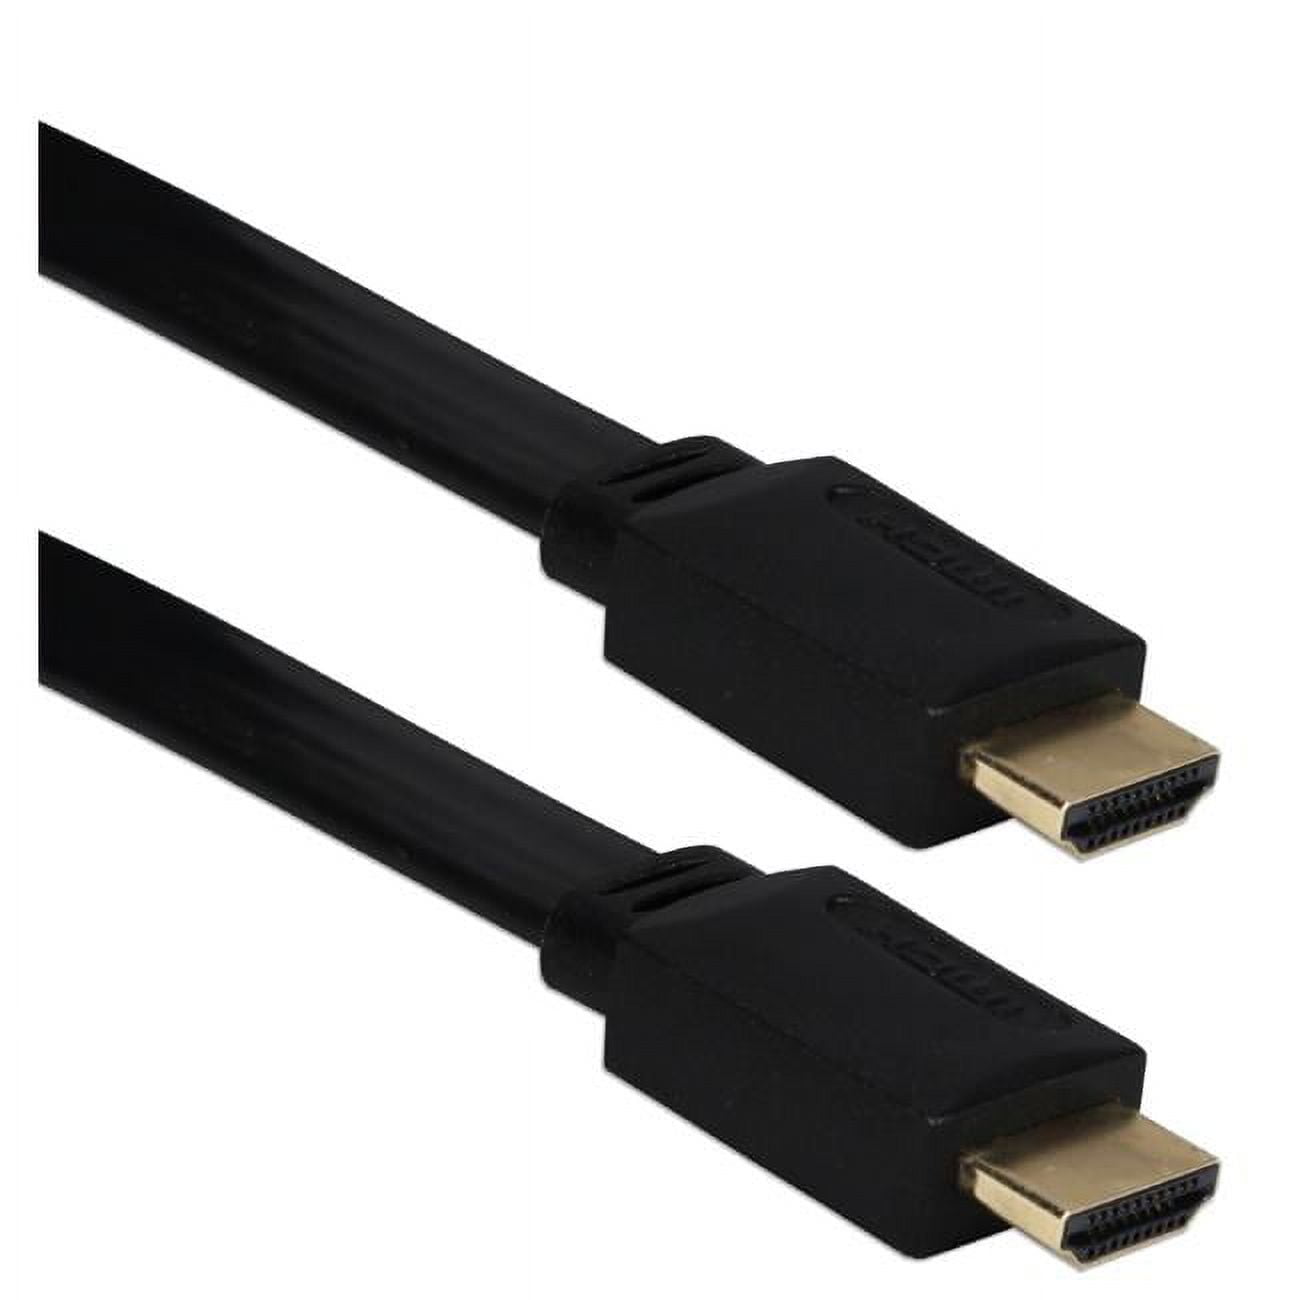 Hdf-12m - Qvs Flat HDMI with Ethernet & 3D 1080Phd Cable